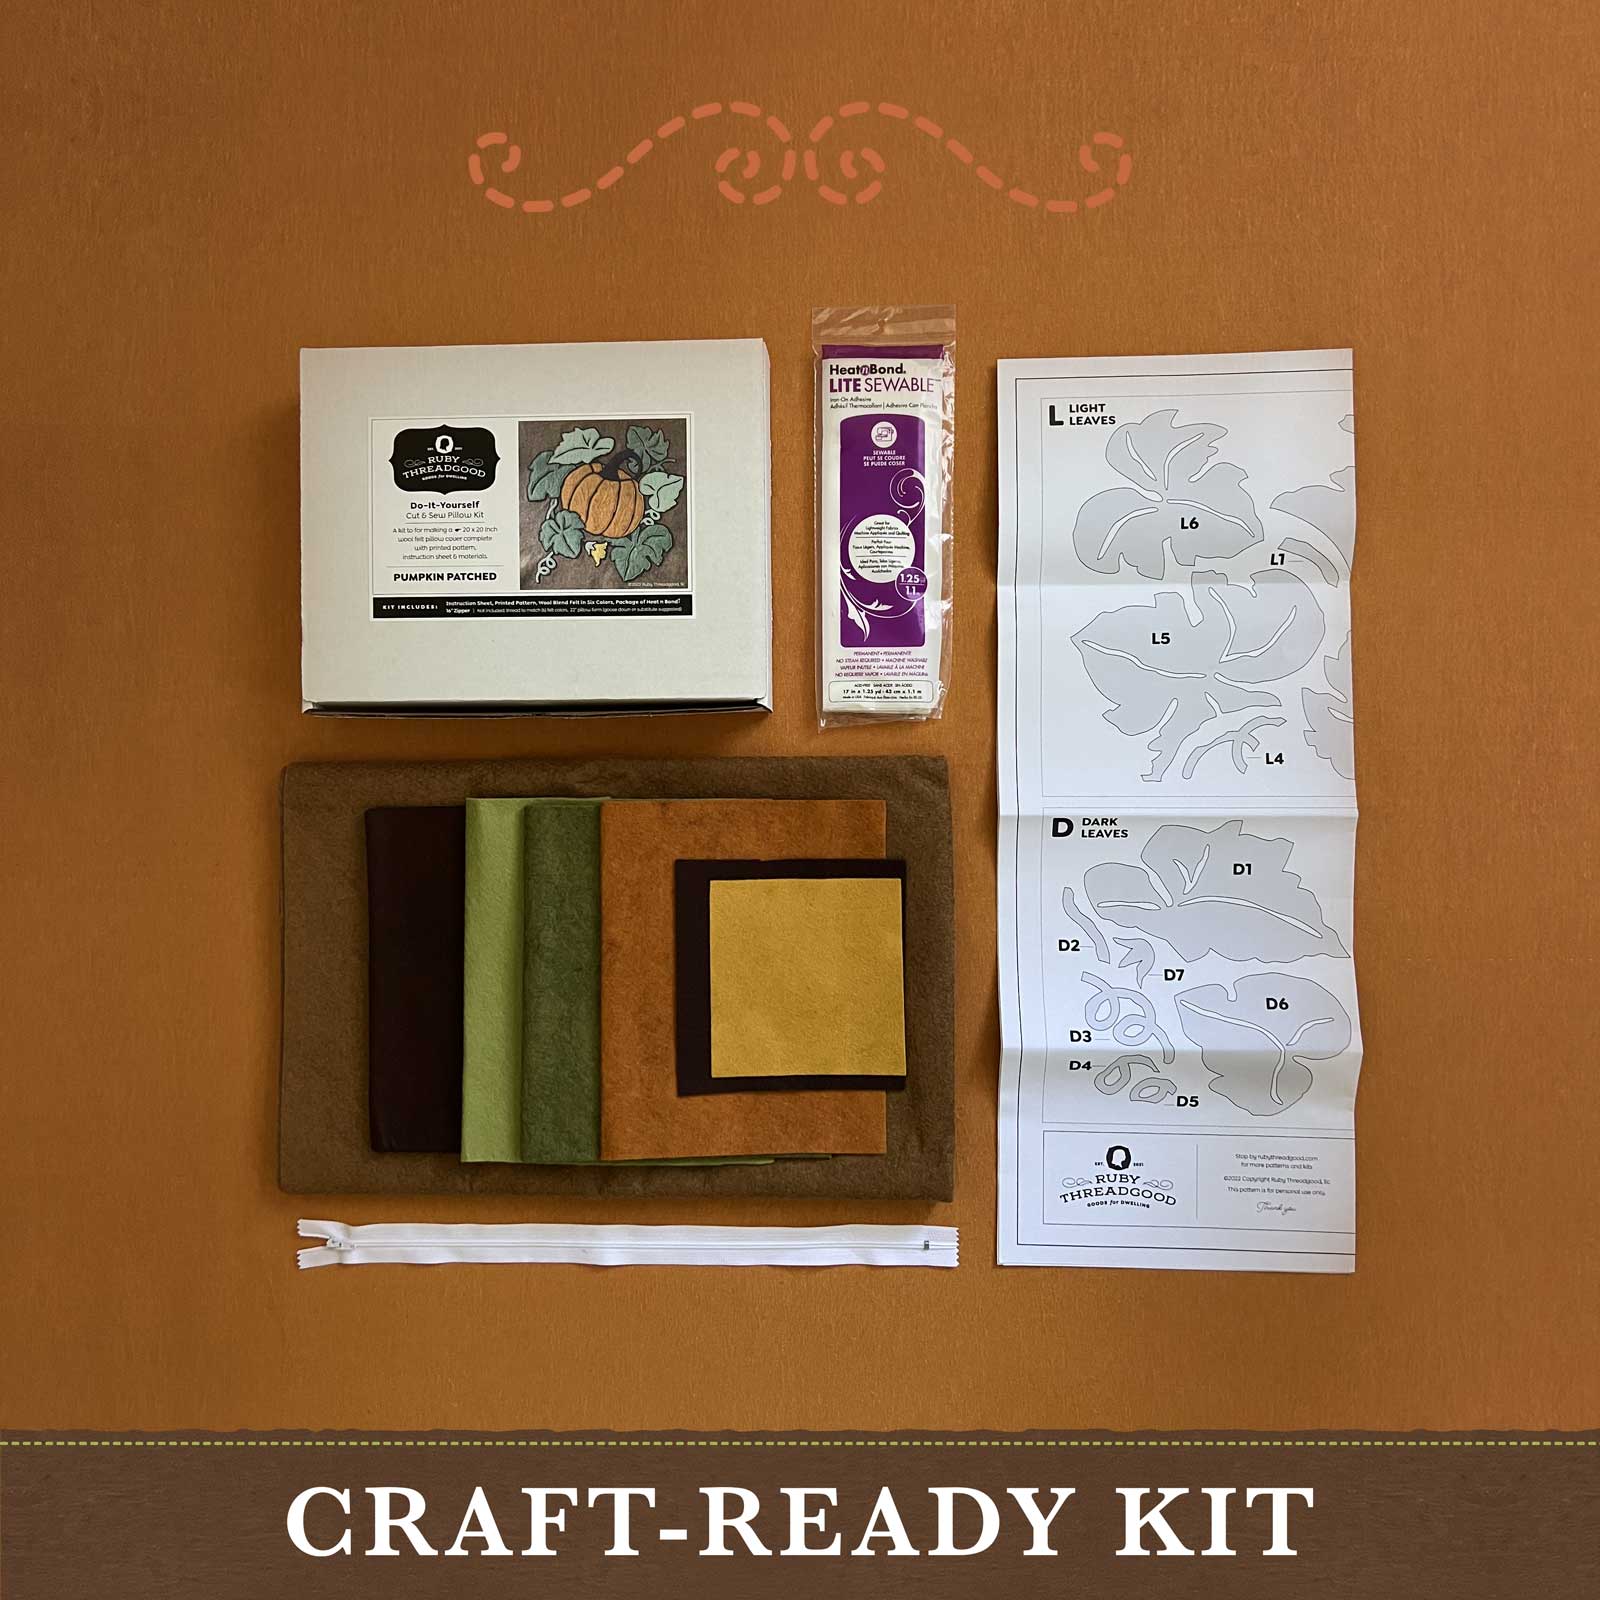 Pumpkin Patched Craft-Ready Kit